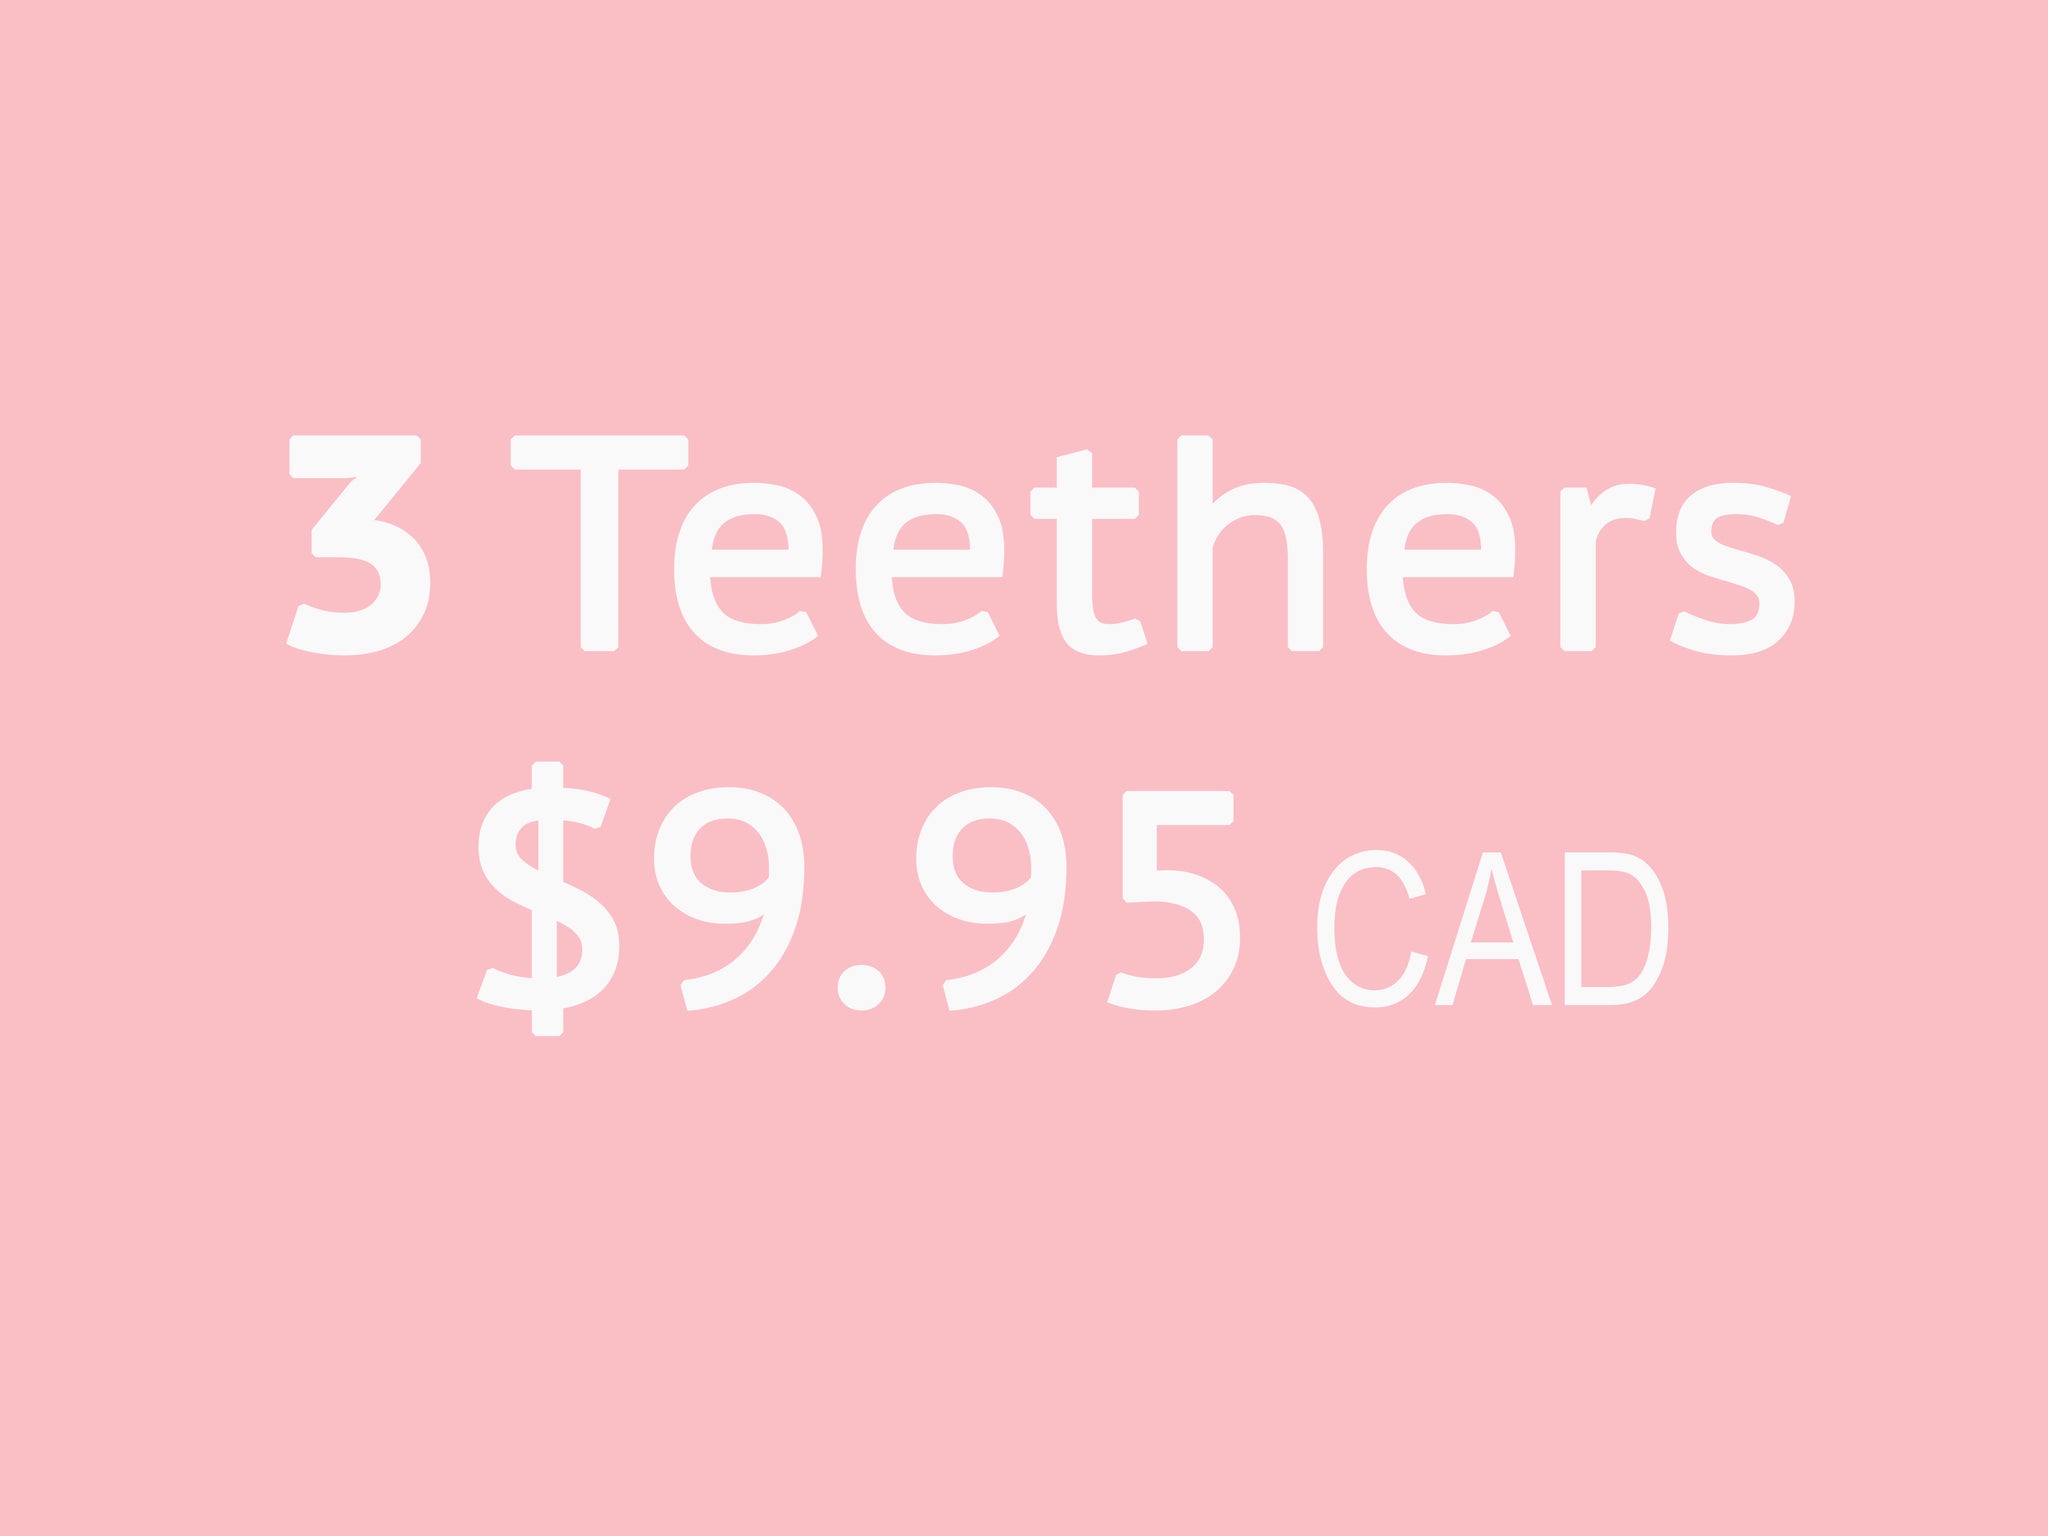 3 Teethers for $9.95